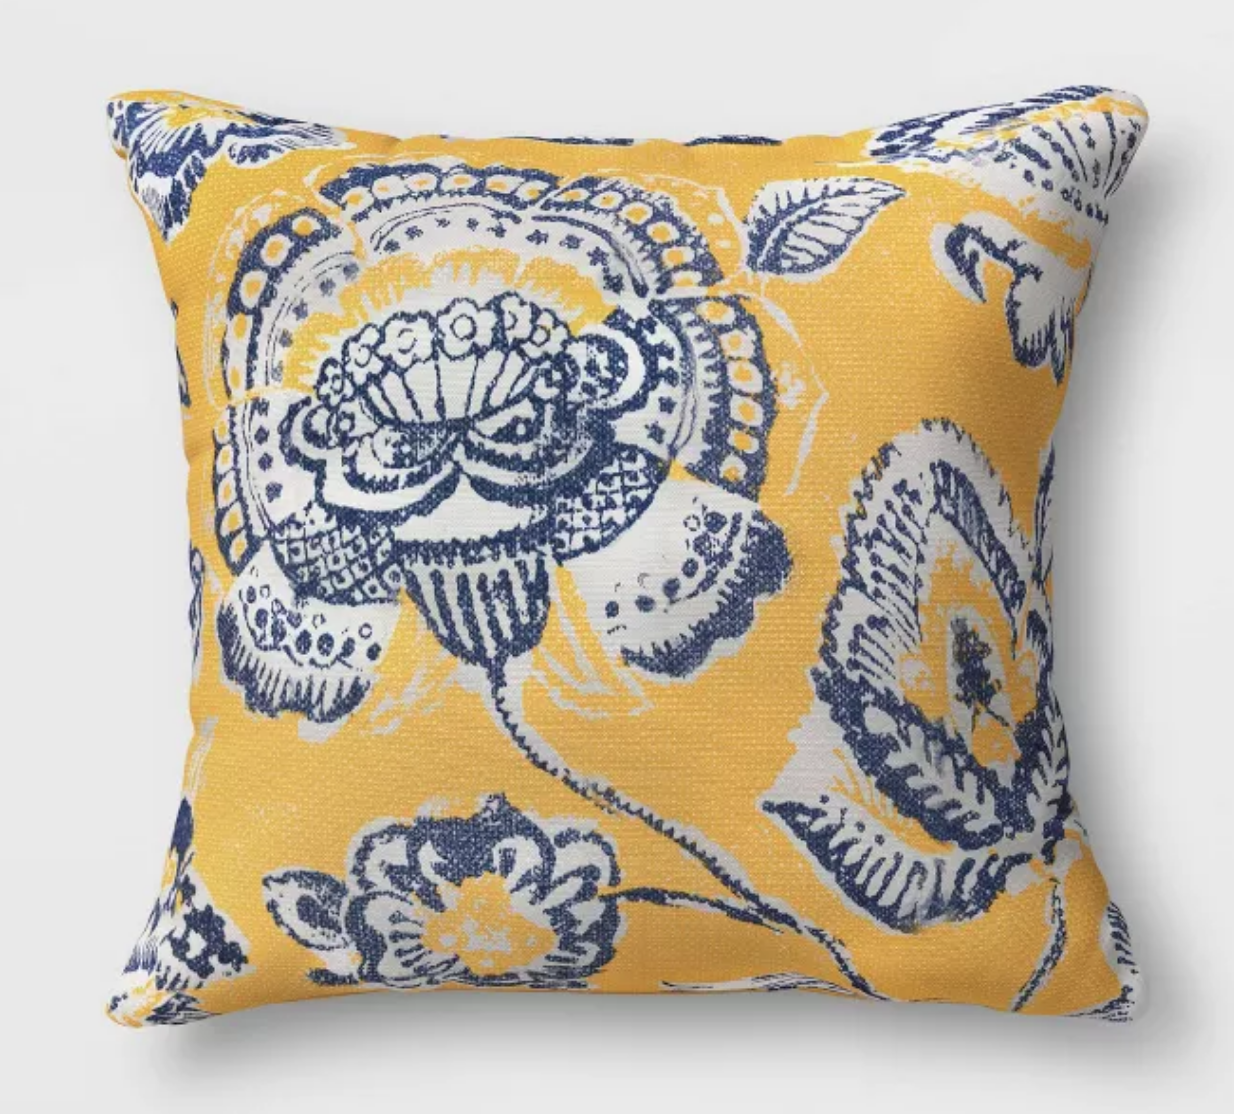 Floral Outdoor Oversize Throw Pillow - $20 from Target